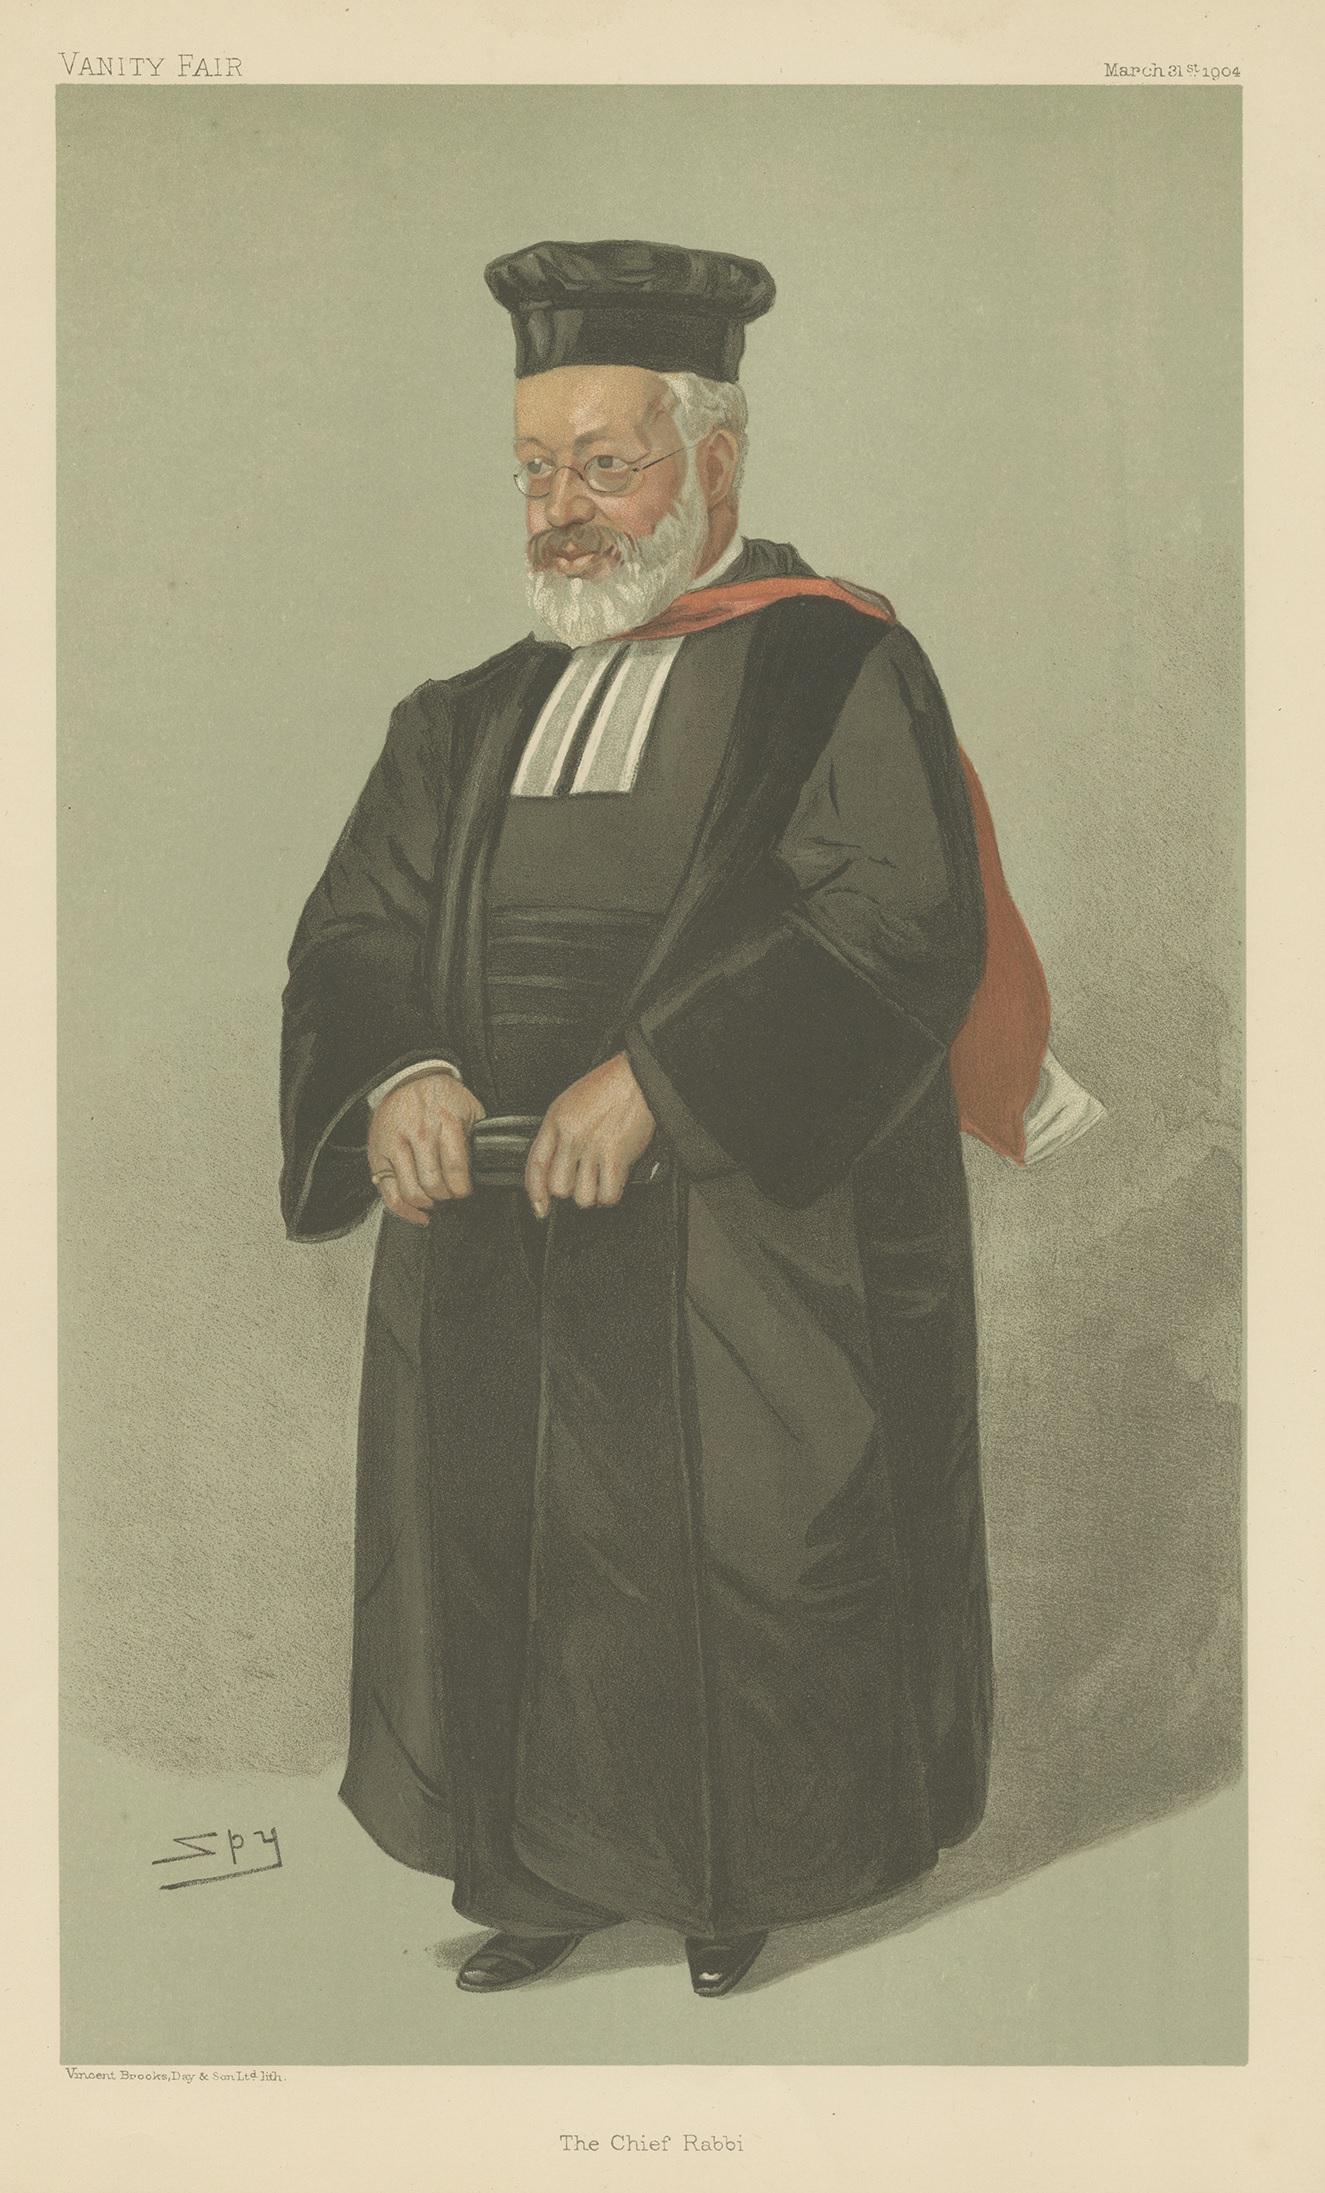 Antique print titled 'The Chief Rabbi'. Hermann Adler was the Chief Rabbi of the British Empire from 1891 to 1911. This caricature print originates from the Vanity Fair of March 31, 1904.